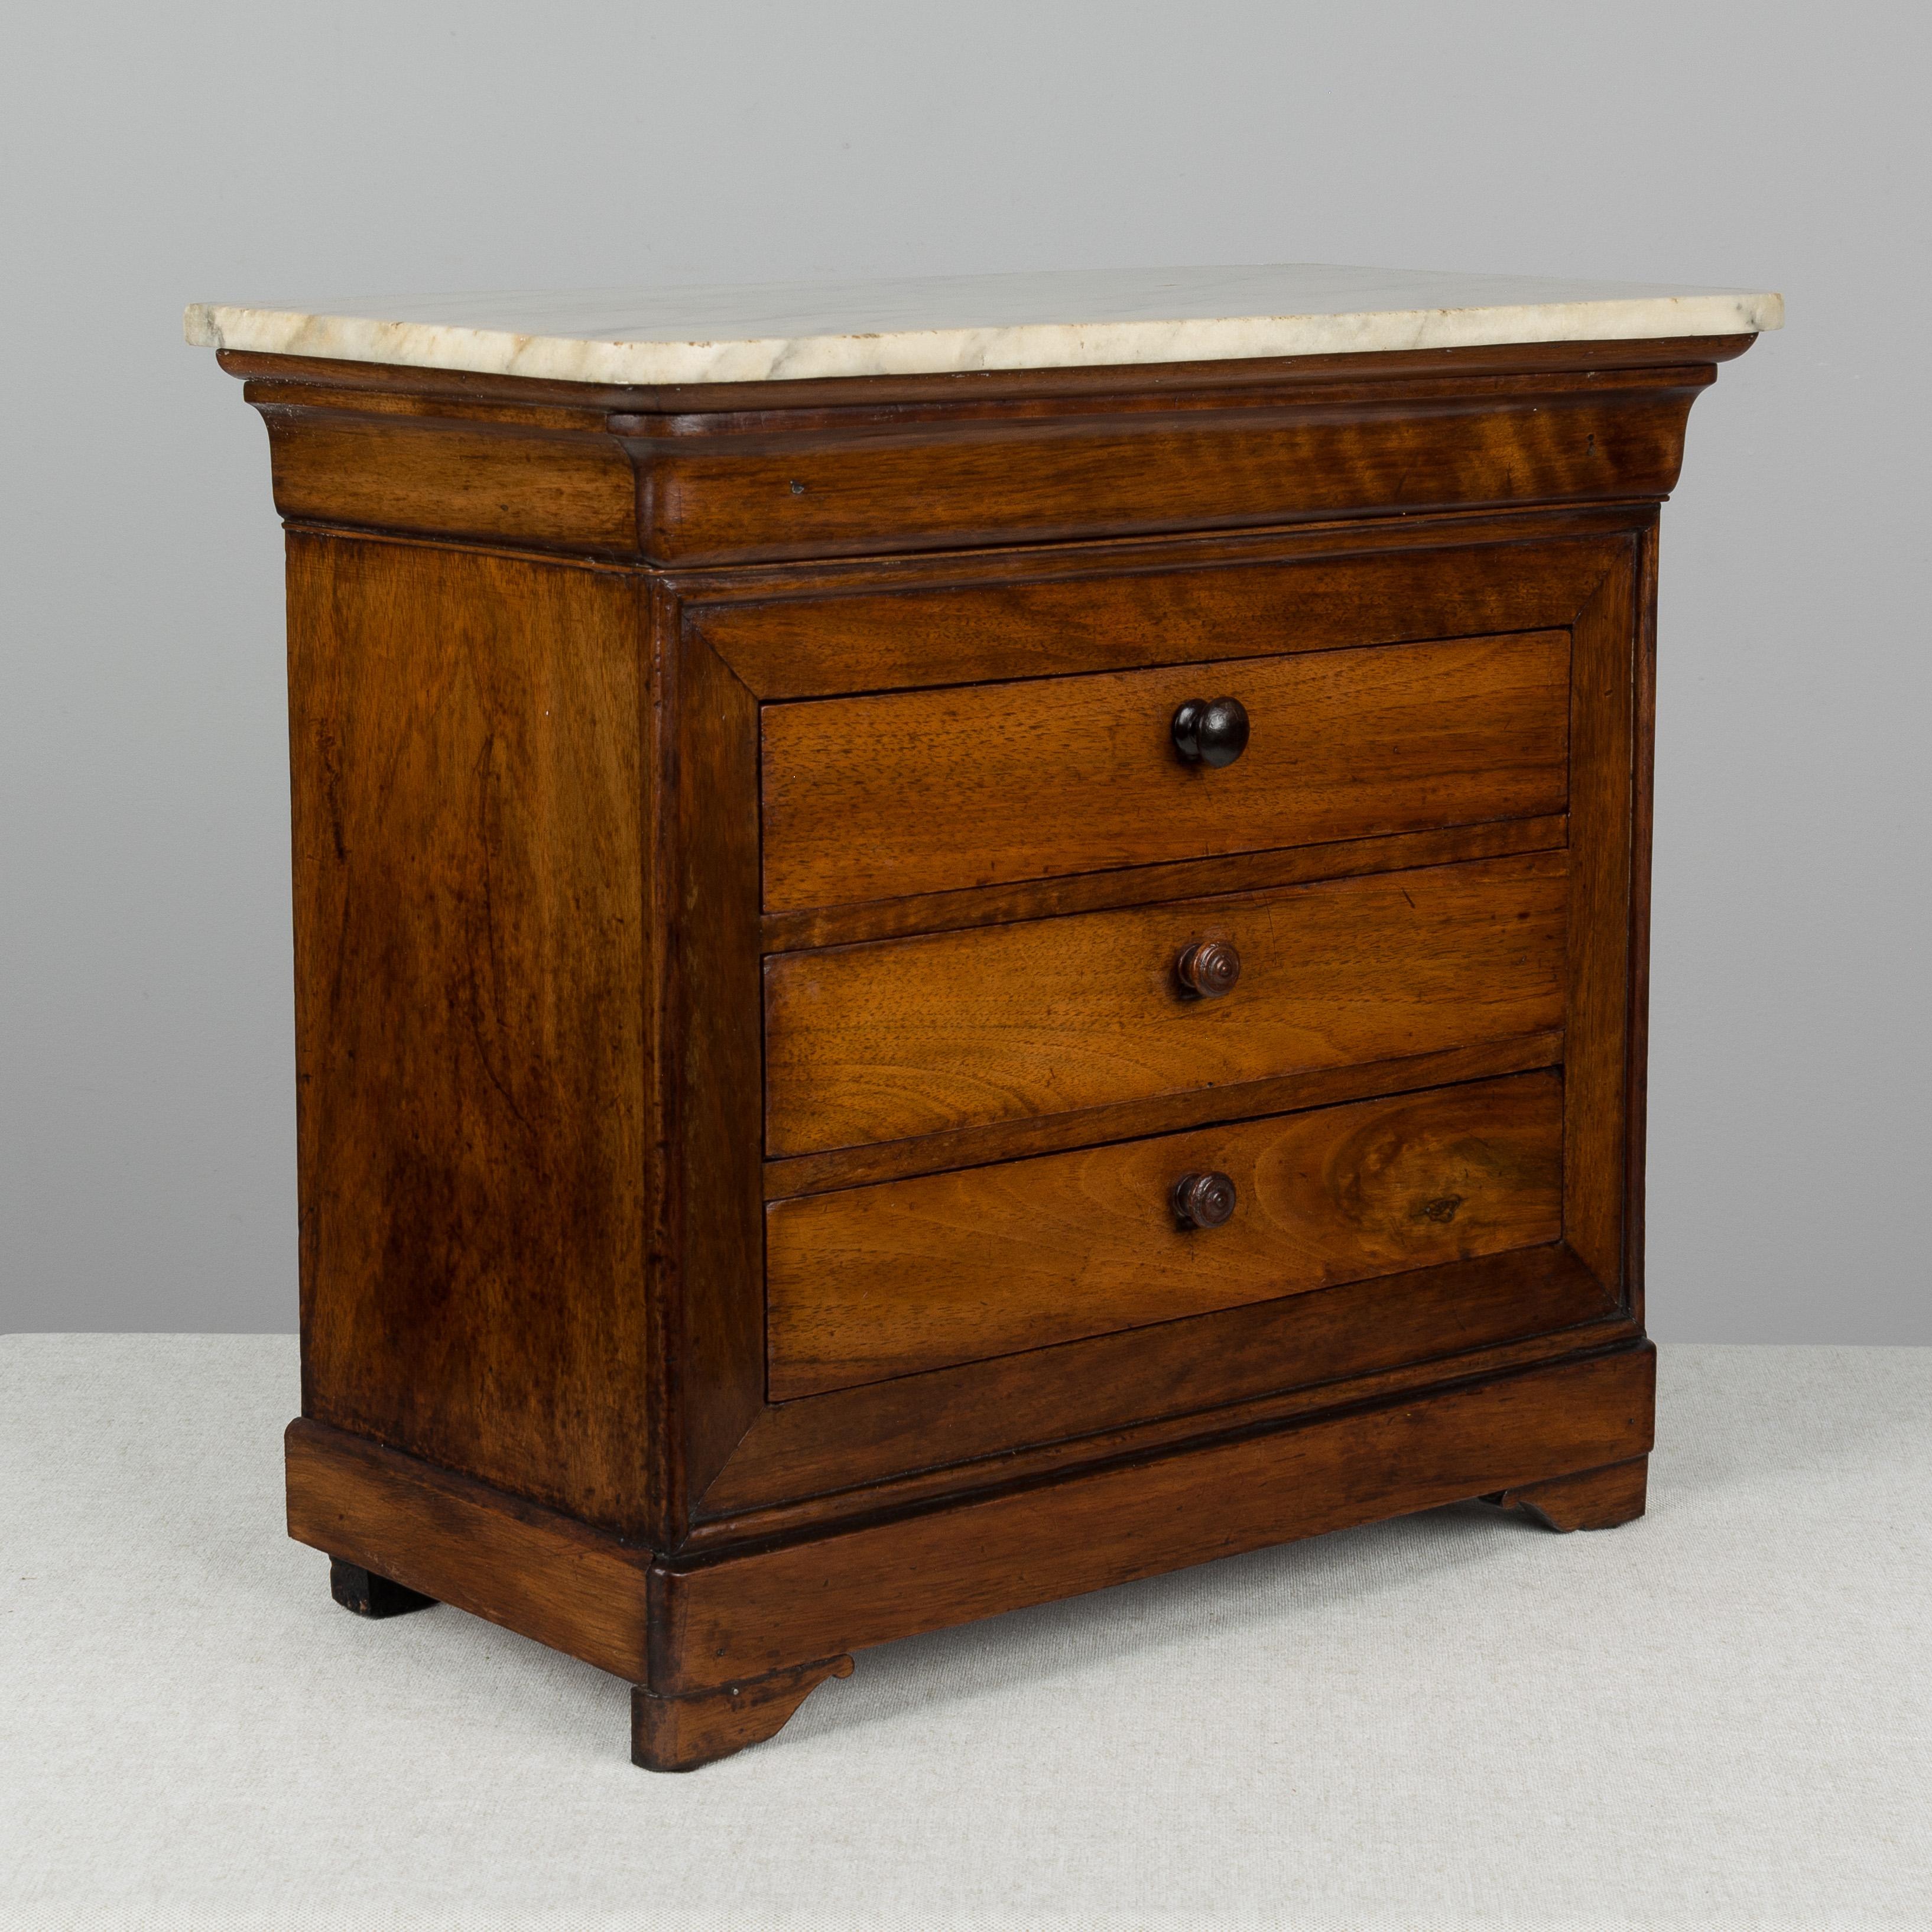 A 19th century Louis Philippe miniature sample commode made of solid walnut with French polish finish. Three dovetailed drawers with turned knobs and one hidden top drawer. The top knob is different than the others. Original marble top. Pine as a